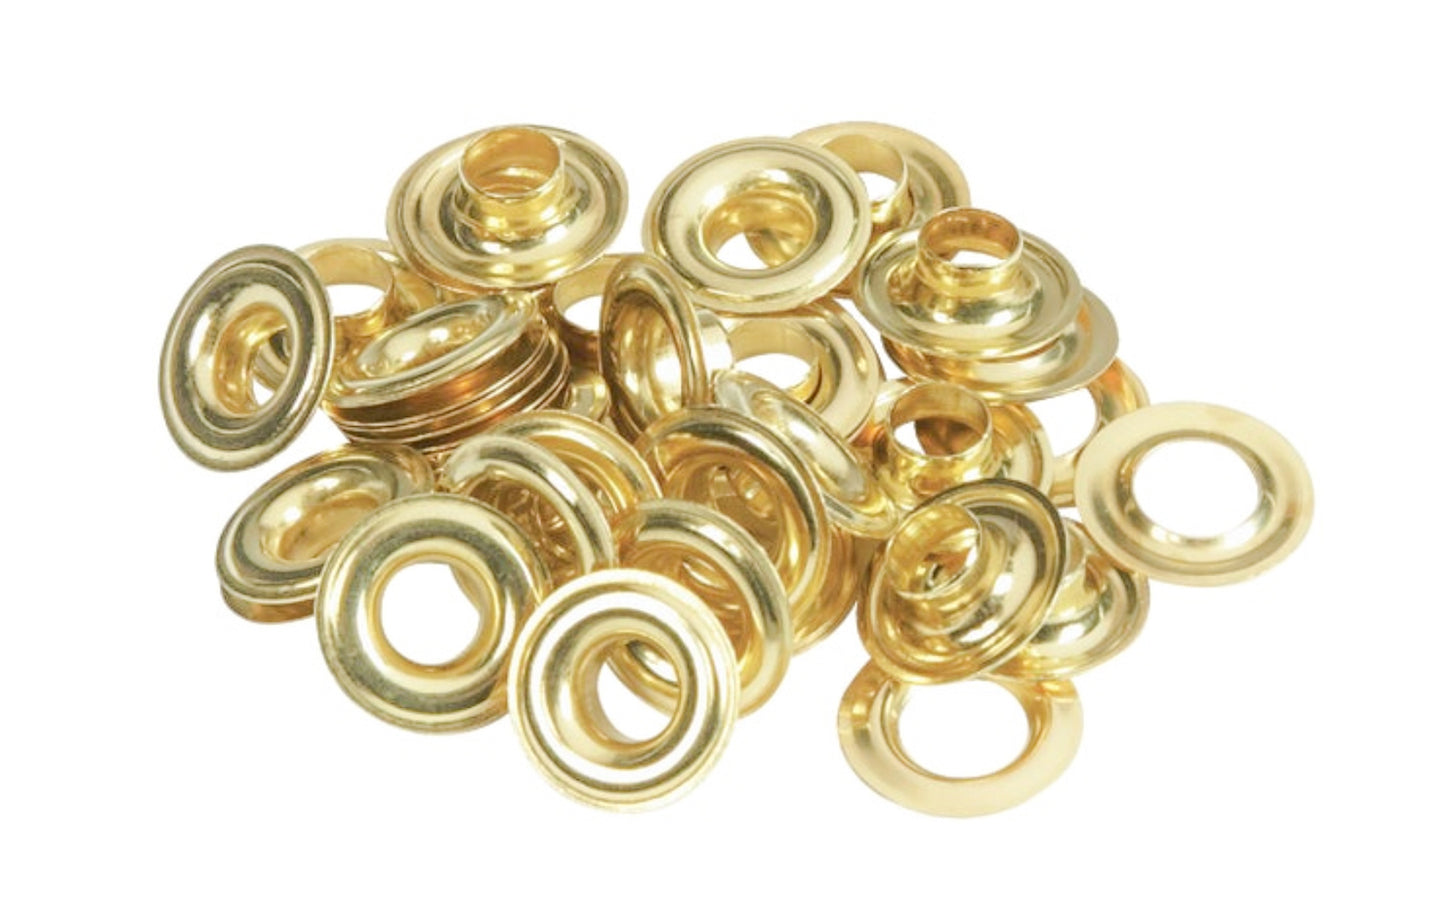 Lord & Hodge 3/8" Brass Grommets - 24 Sets. 3/8" Brass Grommet refills for replacement or repairs in canvas or plastic. Great for vinyl & canvas, tents, sails, covers for boats, trailers, pools, flags & banners, etc. 3/8" inside diameter grommets.Made by Lord and Hodge, Inc. Model 1074-2. Made in USA.